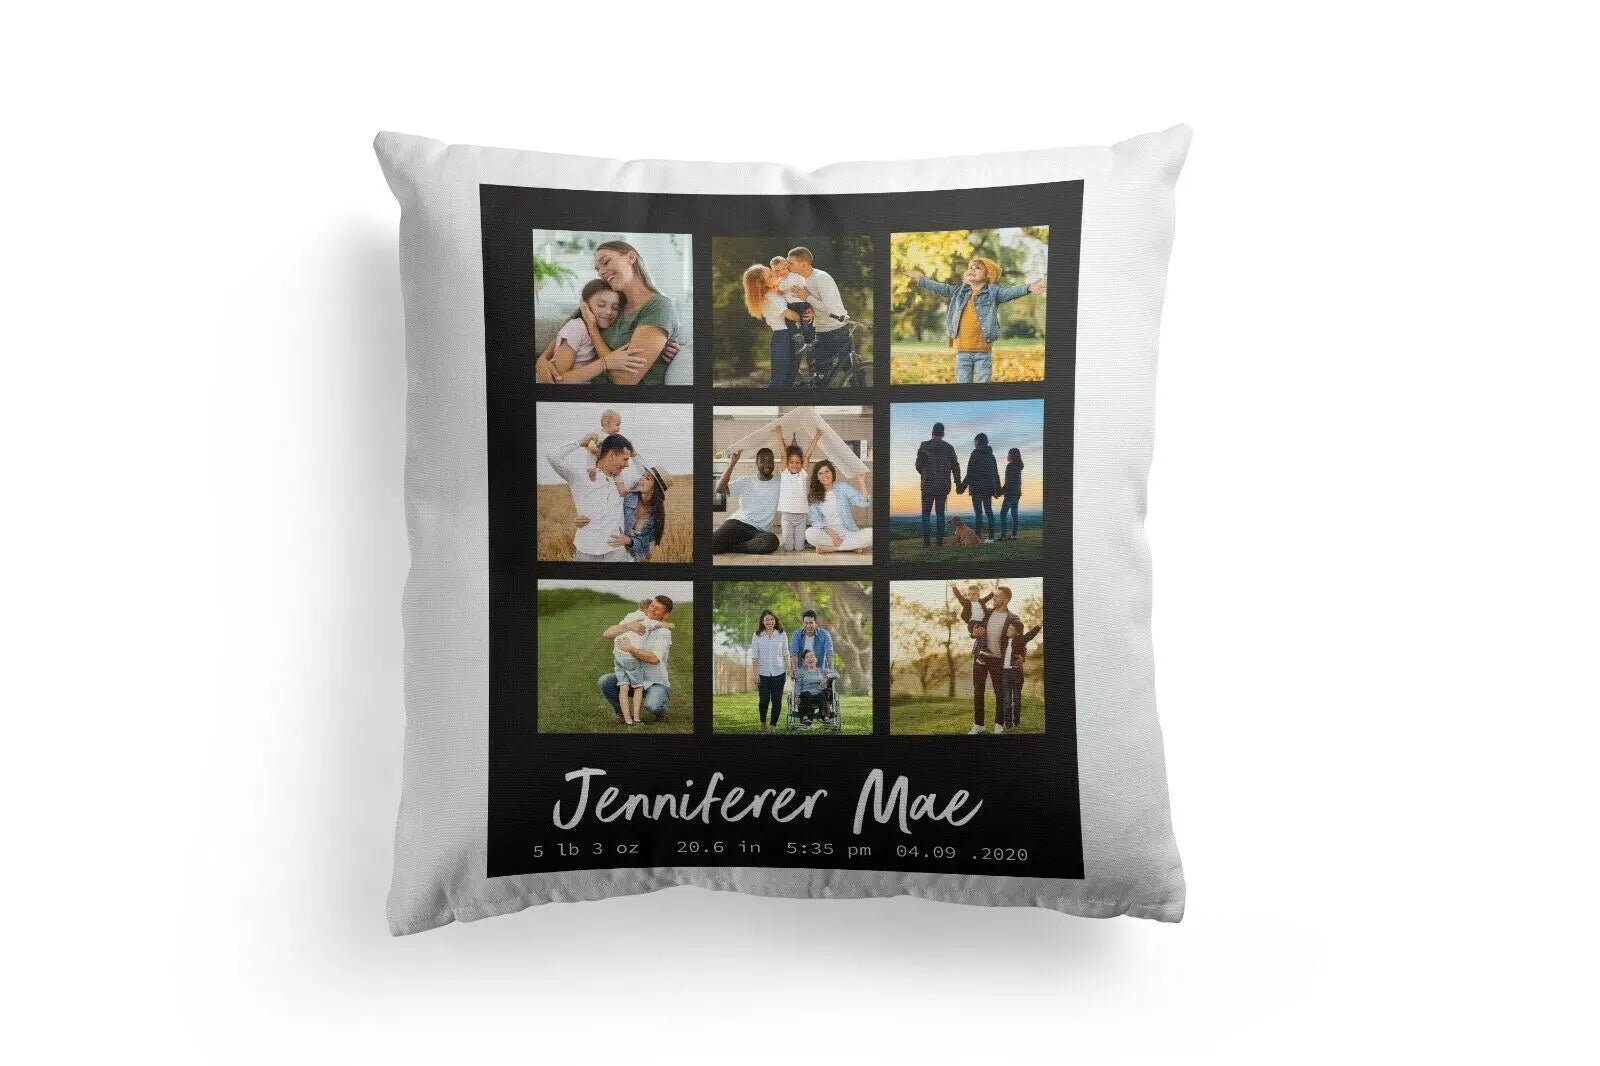 Personalised Cushion Any Images Perfect Gift Décor  - Up to 9 Photos - CushionPop